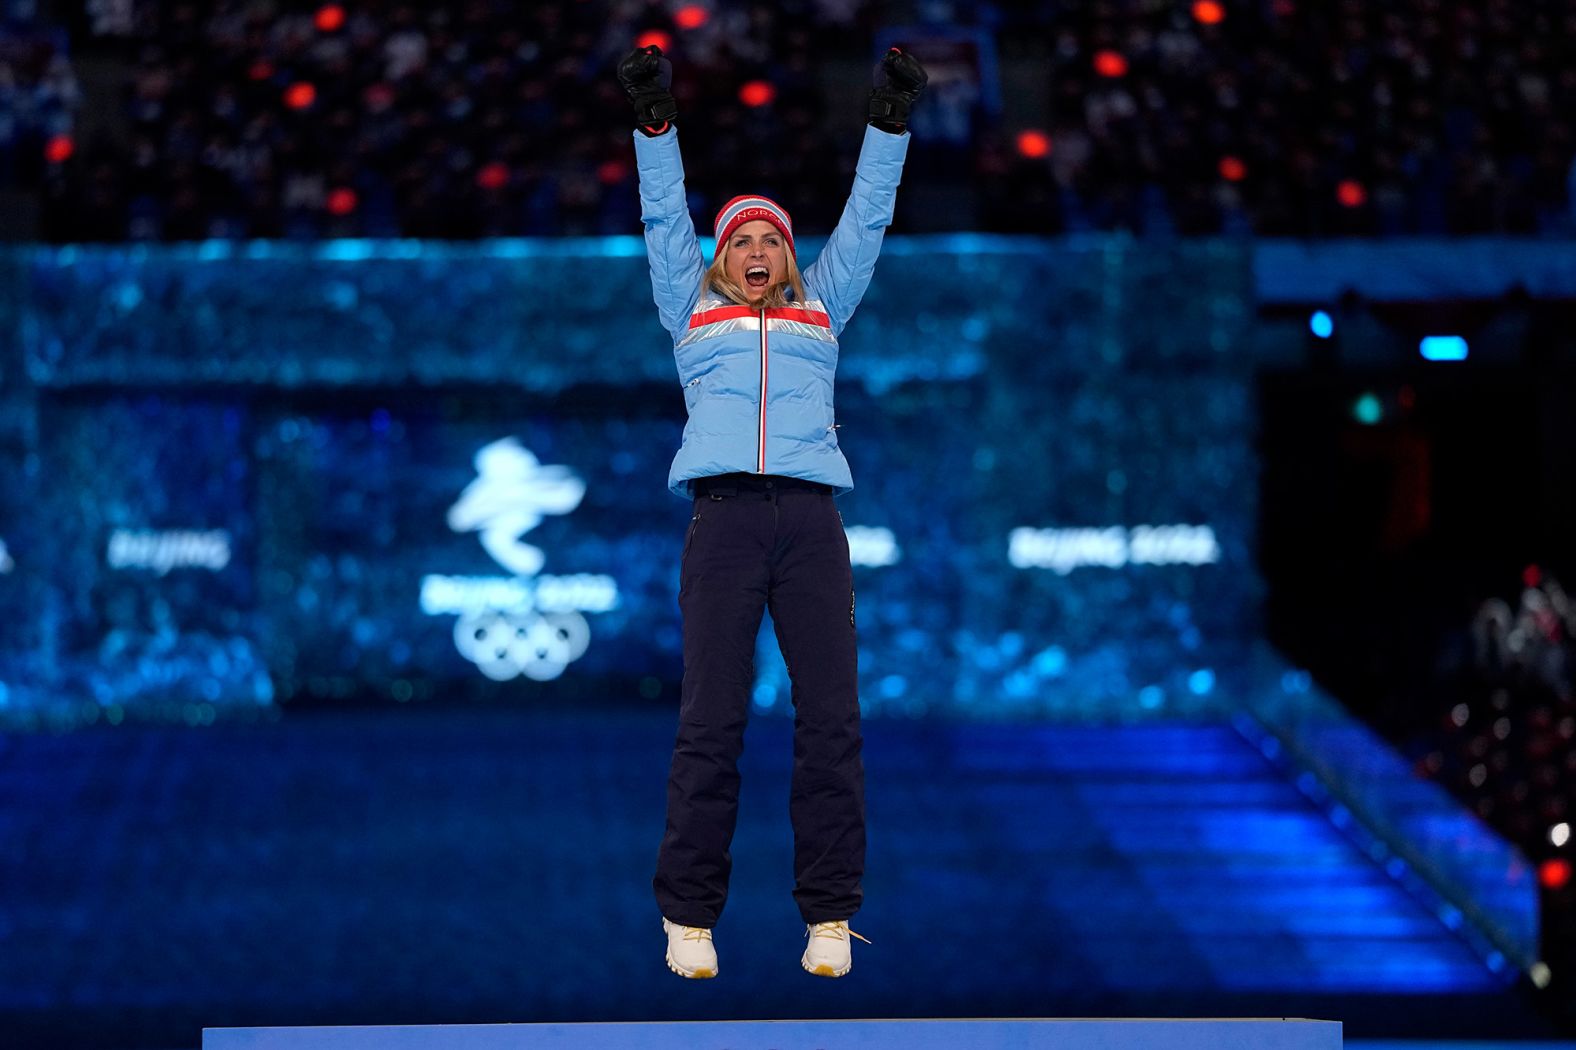 Therese Johaug, a cross-country skier from Norway, celebrates on a podium as she receives one of her gold medals during the closing ceremony. Johaug won three gold medals in Beijing, and <a href="index.php?page=&url=https%3A%2F%2Fwww.cnn.com%2Fworld%2Flive-news%2Fbeijing-winter-olympics-02-20-22-spt%2Fh_7d87c55c1539e56df6b9f26224f5fb1f" target="_blank">this latest one</a> was for the mass start event that she won on Saturday.